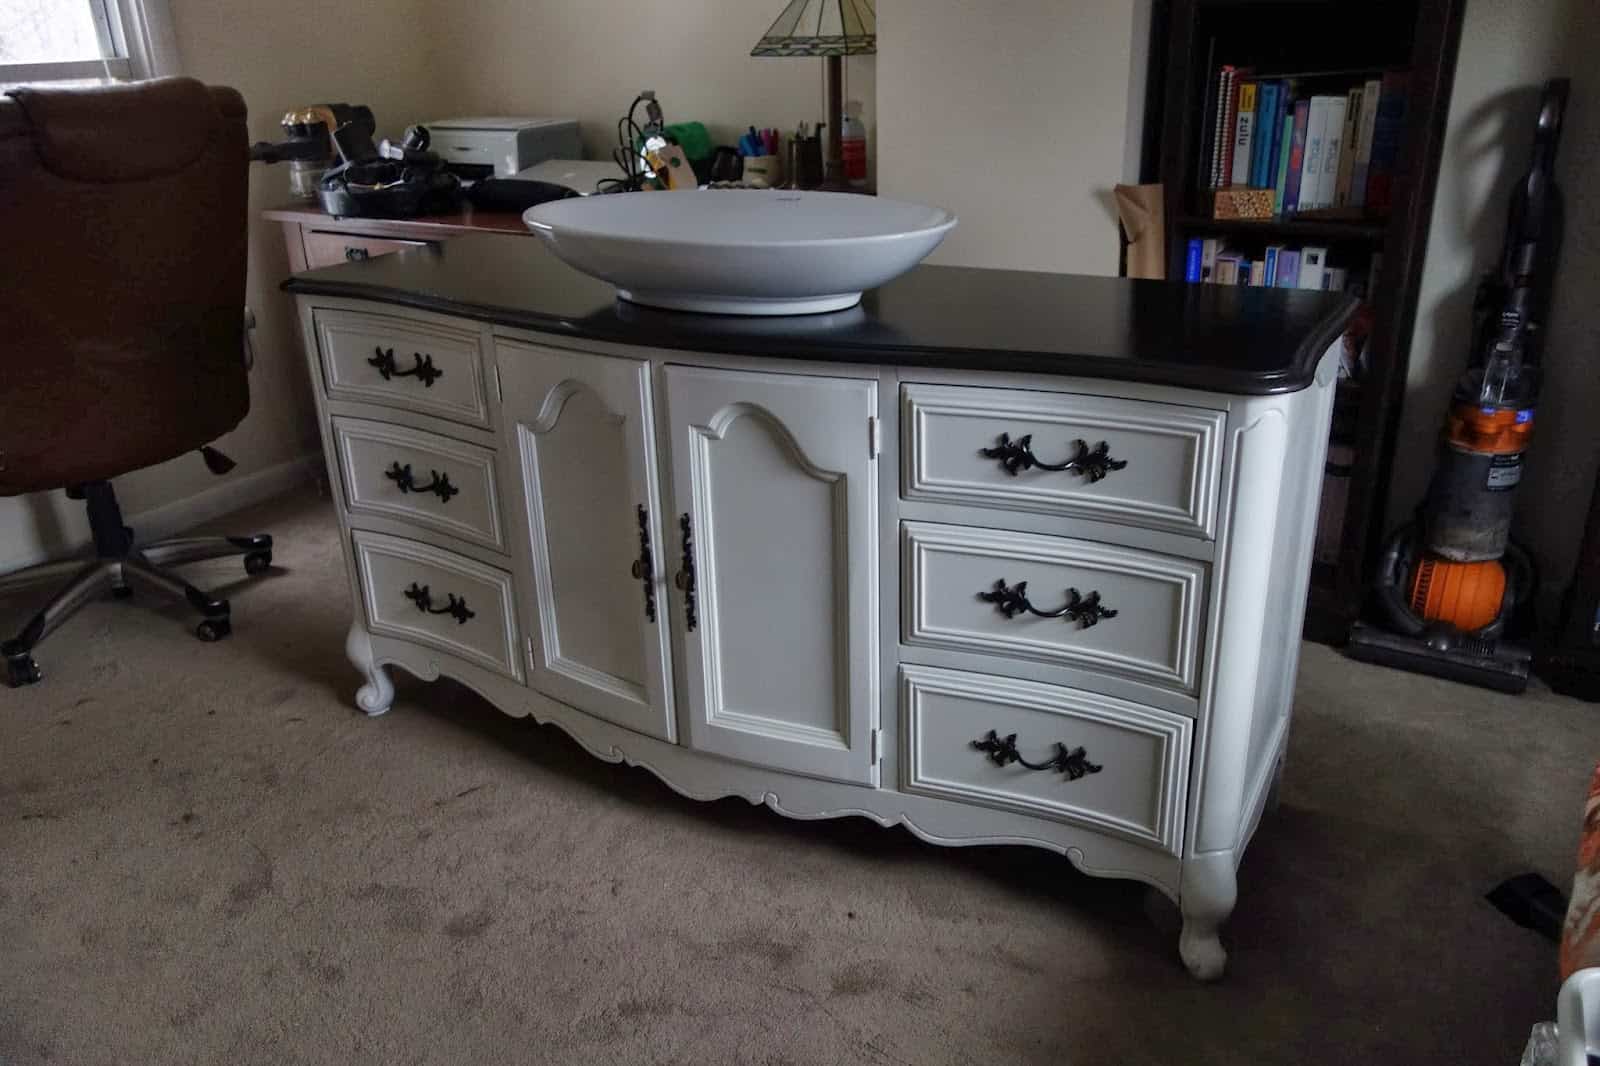 Making bathroom vanities made out of old dressers is simple when you pick a matching sink and hardware to give that vintage feel